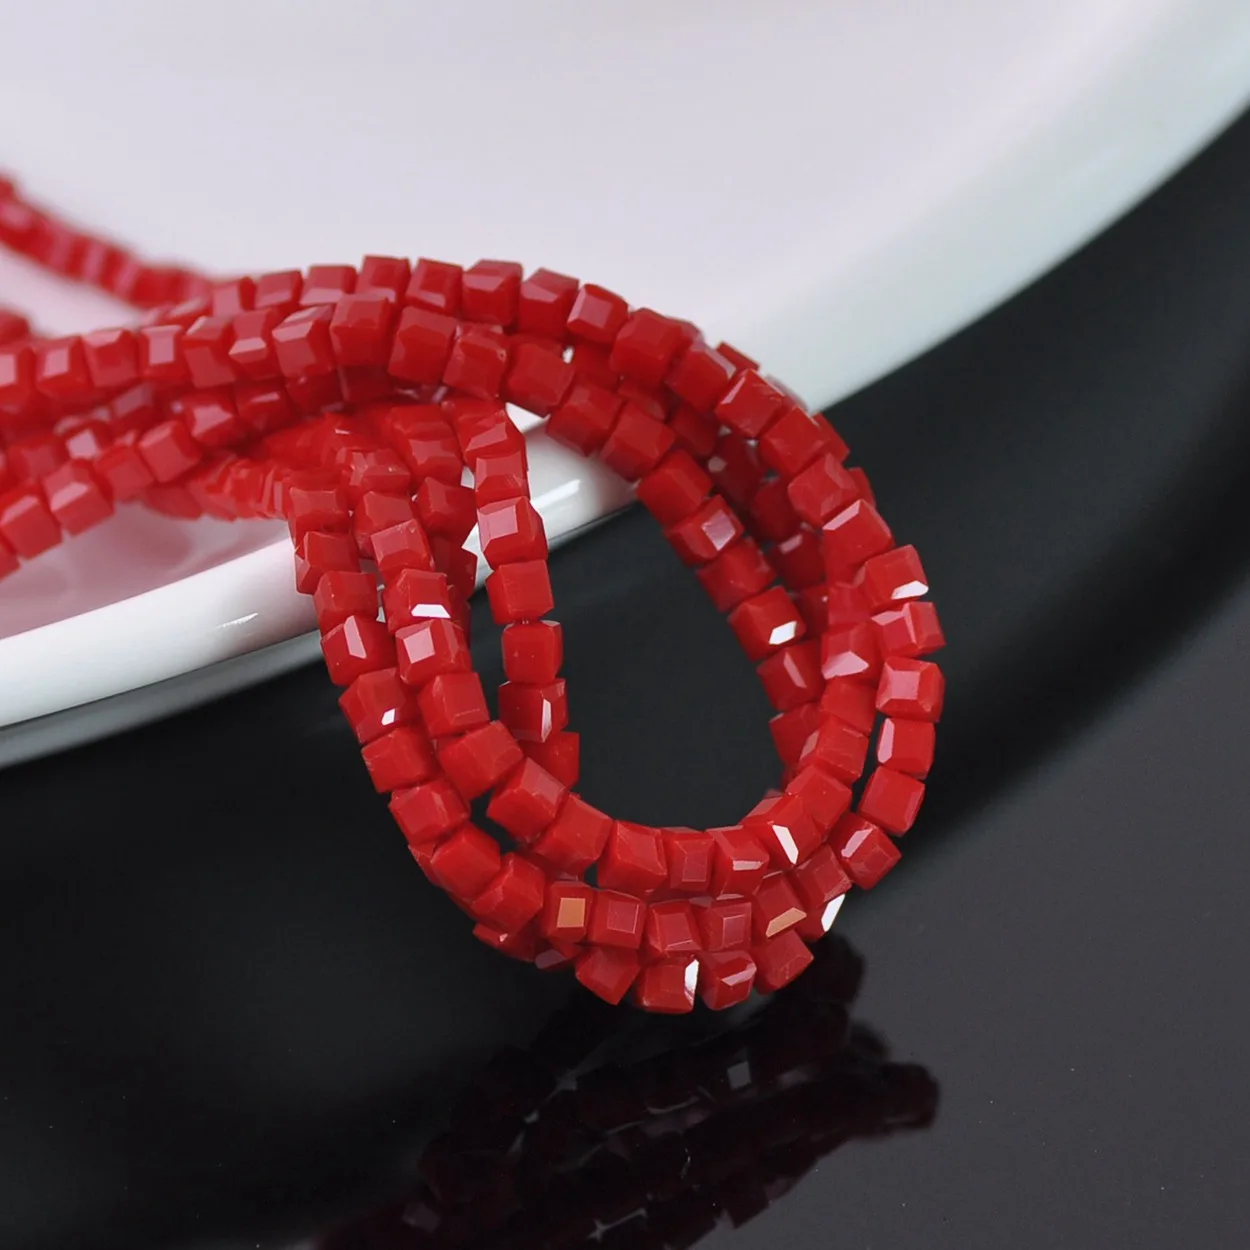 200pcs Opaque Deep Red 3mm Small Cube Square Faceted Czech Crystal Glass Loose Crafts Beads Wholesale lot for Jewelry Making DIY solid color 3x2mm 4x3mm 6x4mm 8x6mm 10x7mm 12x8mm rondelle faceted czech crystal glass loose spacer beads for jewelry making diy